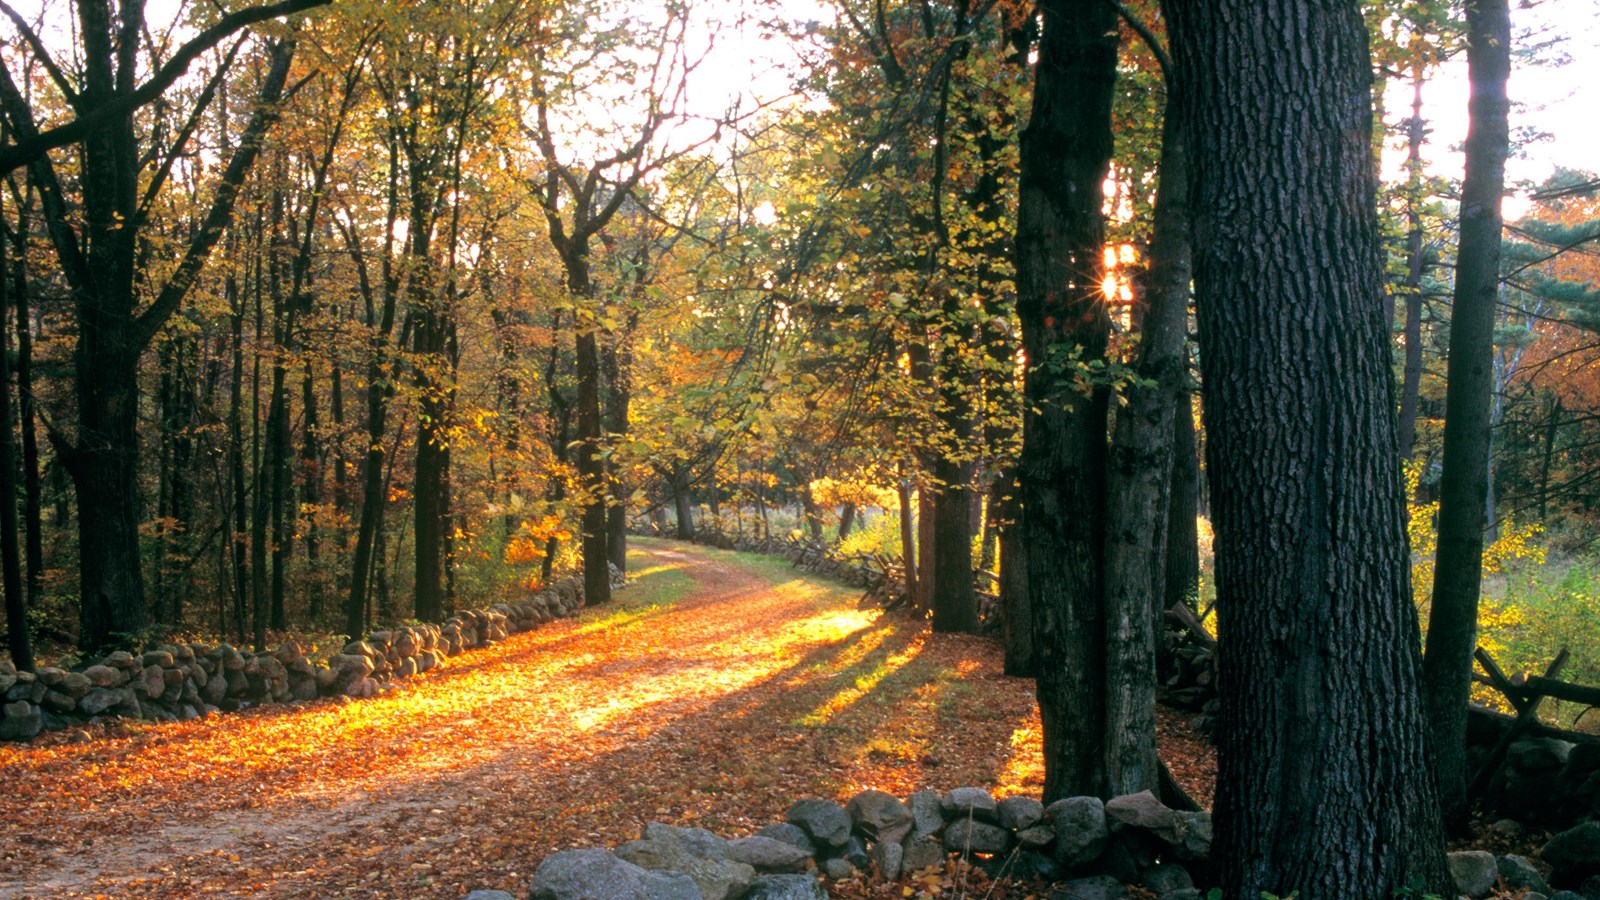 Dirt road bordered by stone walls running through a wooded landscape in autumn colors